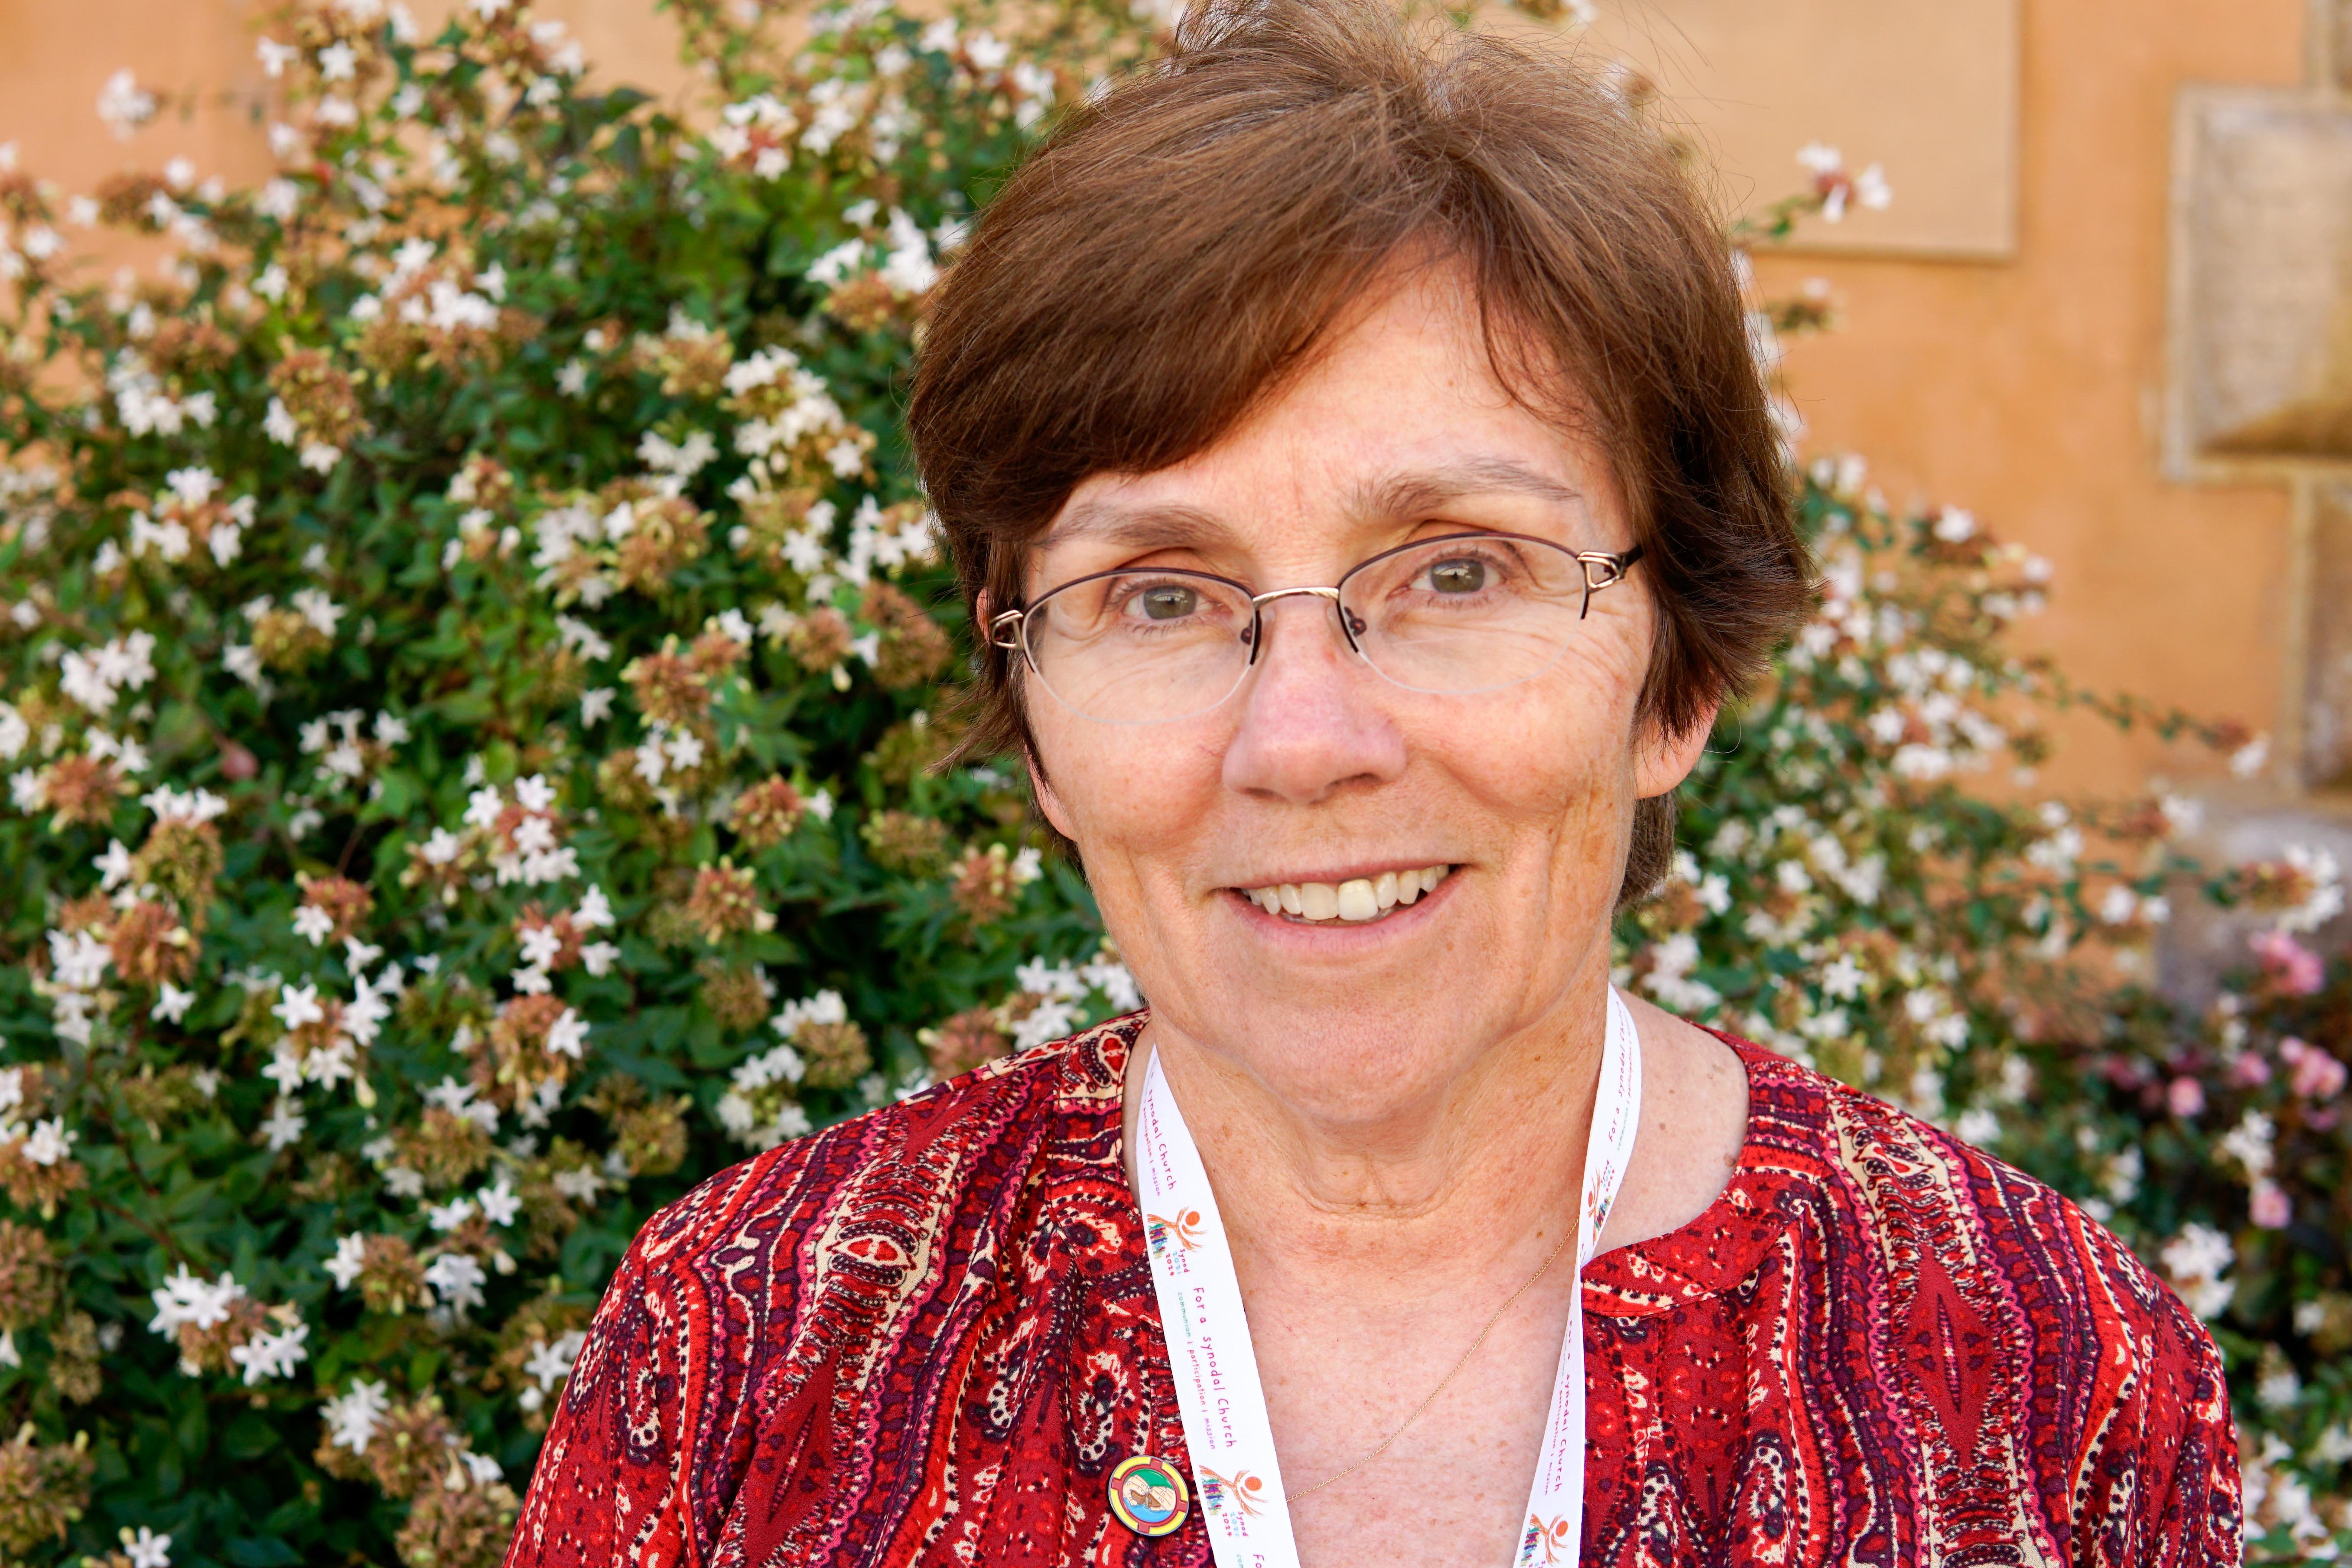 Elizabeth Newman, chairperson of the Baptist World Alliance Commission on Christian Unity.